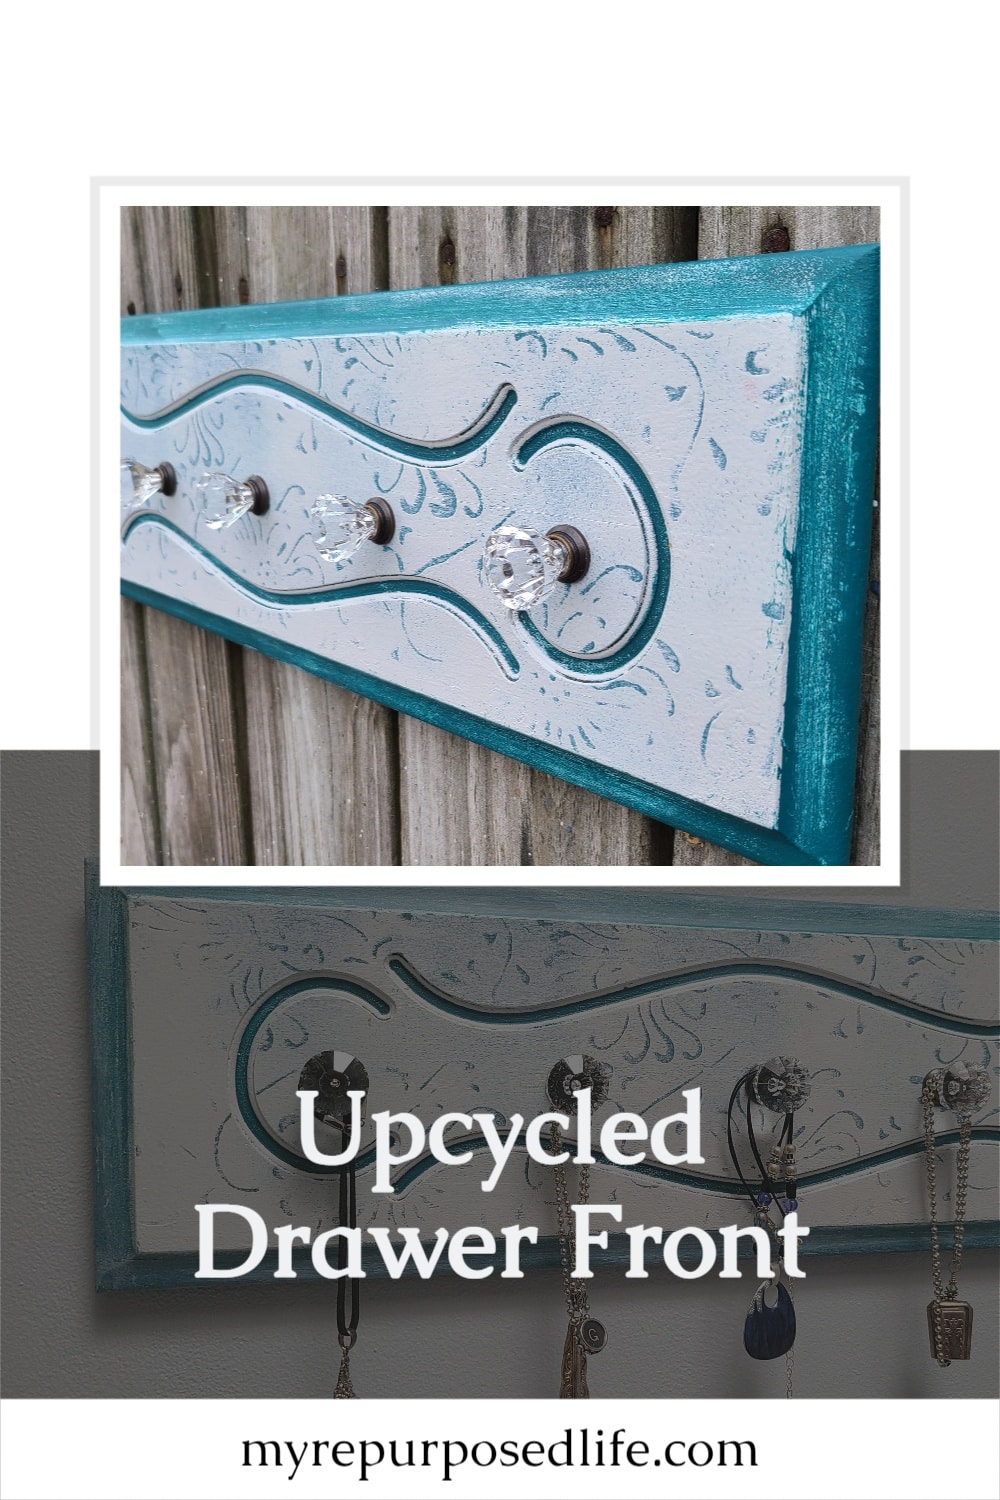 How to make a wooden hanging necklace organizer using a repurposed drawer front and new glass knobs. Hang jewelry, scarves, hats and more. #MyRepurposedLife #repurposed #drawer #jewelry #organizer #diy via @repurposedlife